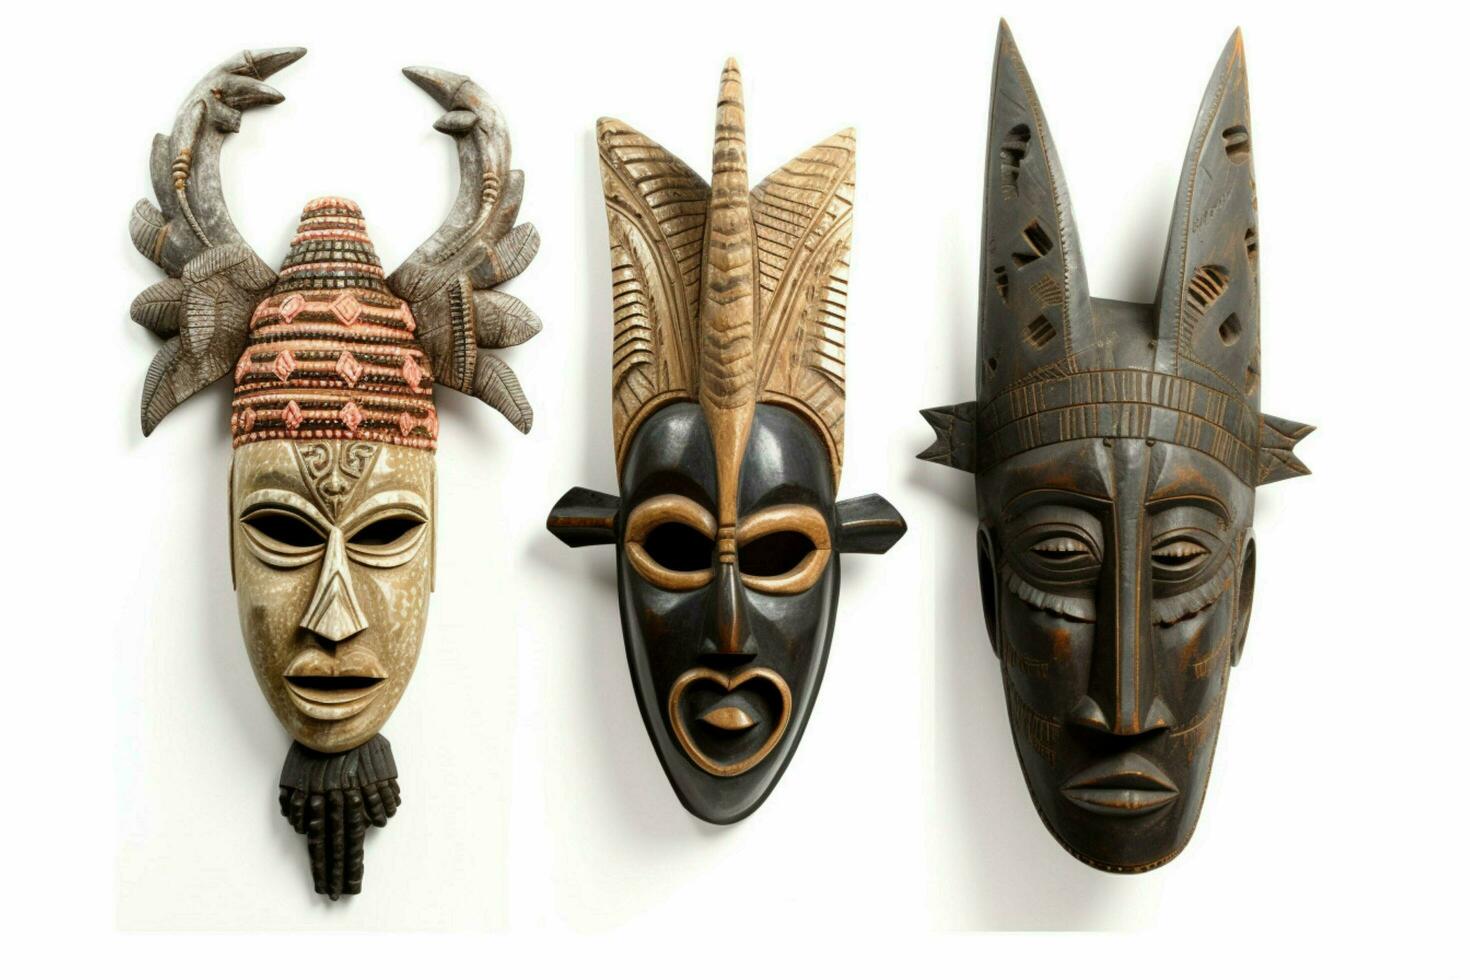 Use of elements from traditional African masks and photo